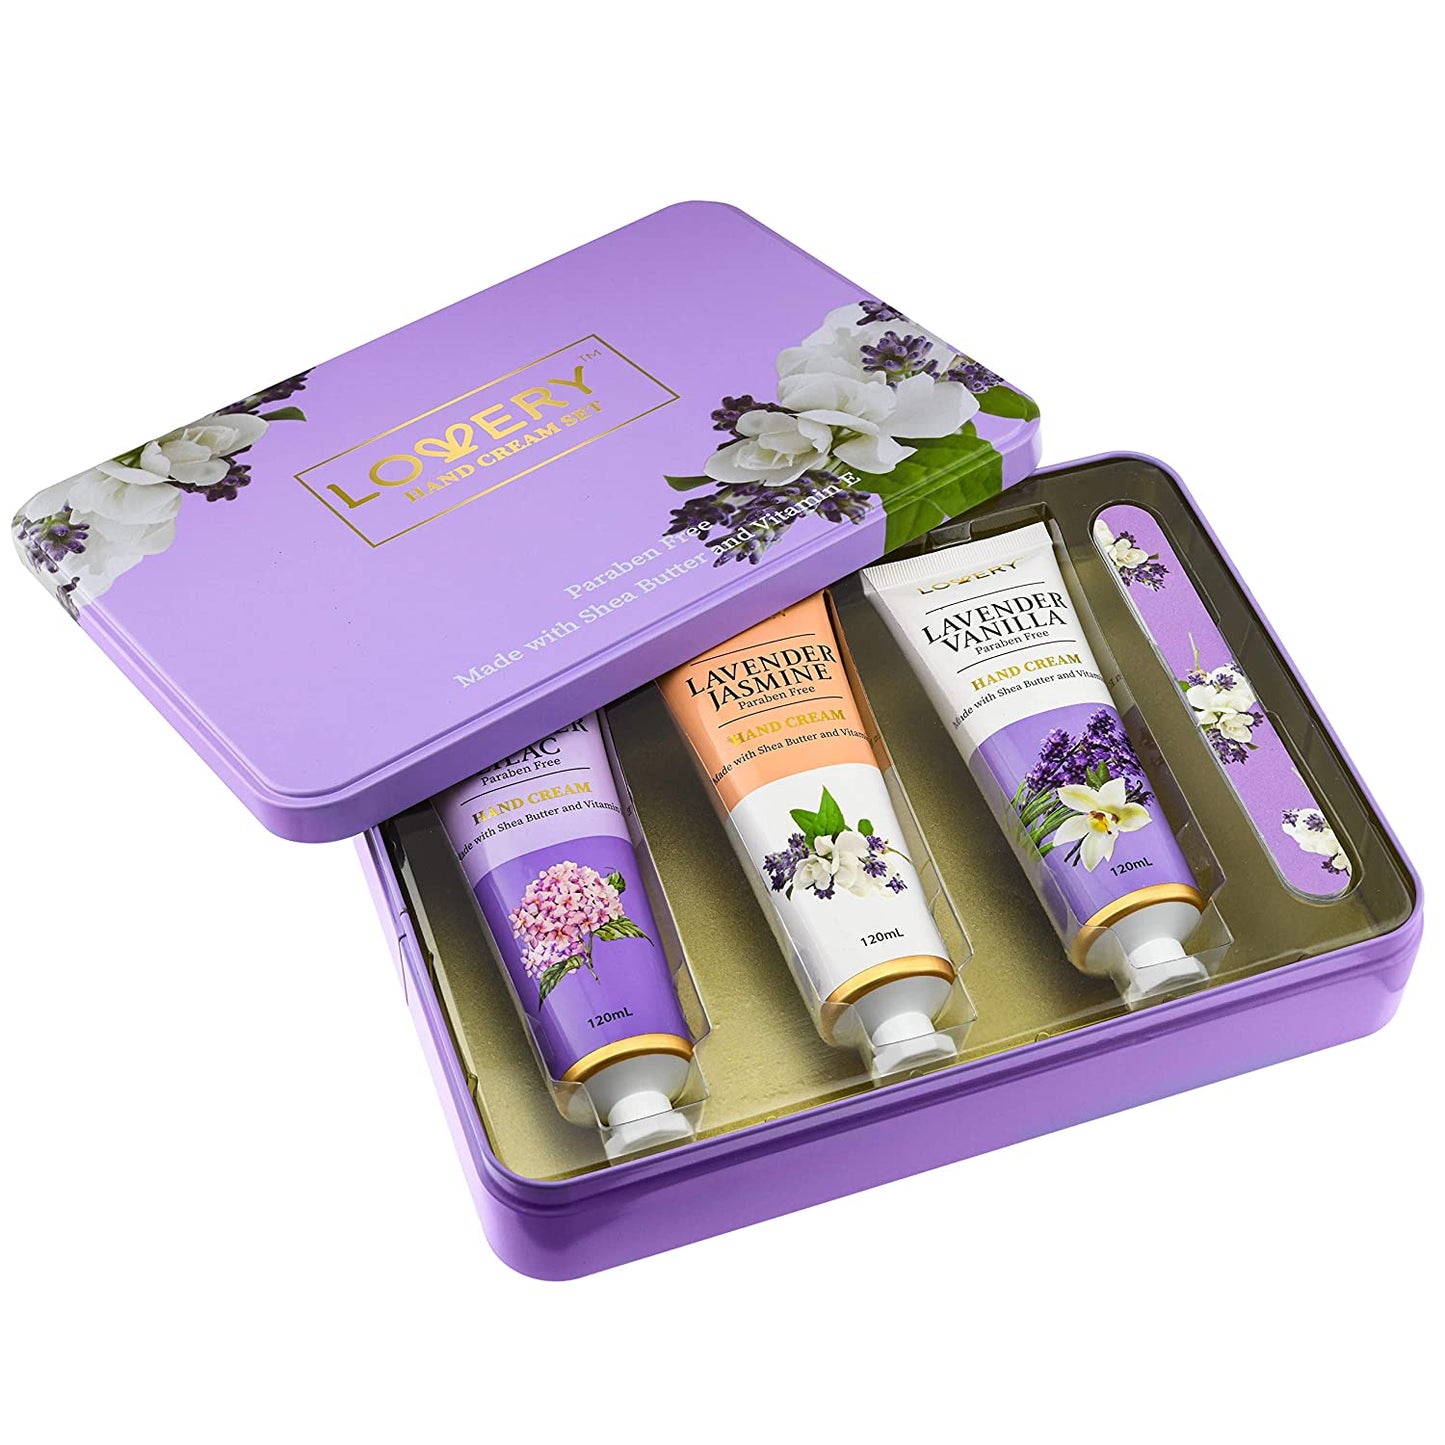 Lavender Hand Lotion Gift Set - 5Pc Body Creams